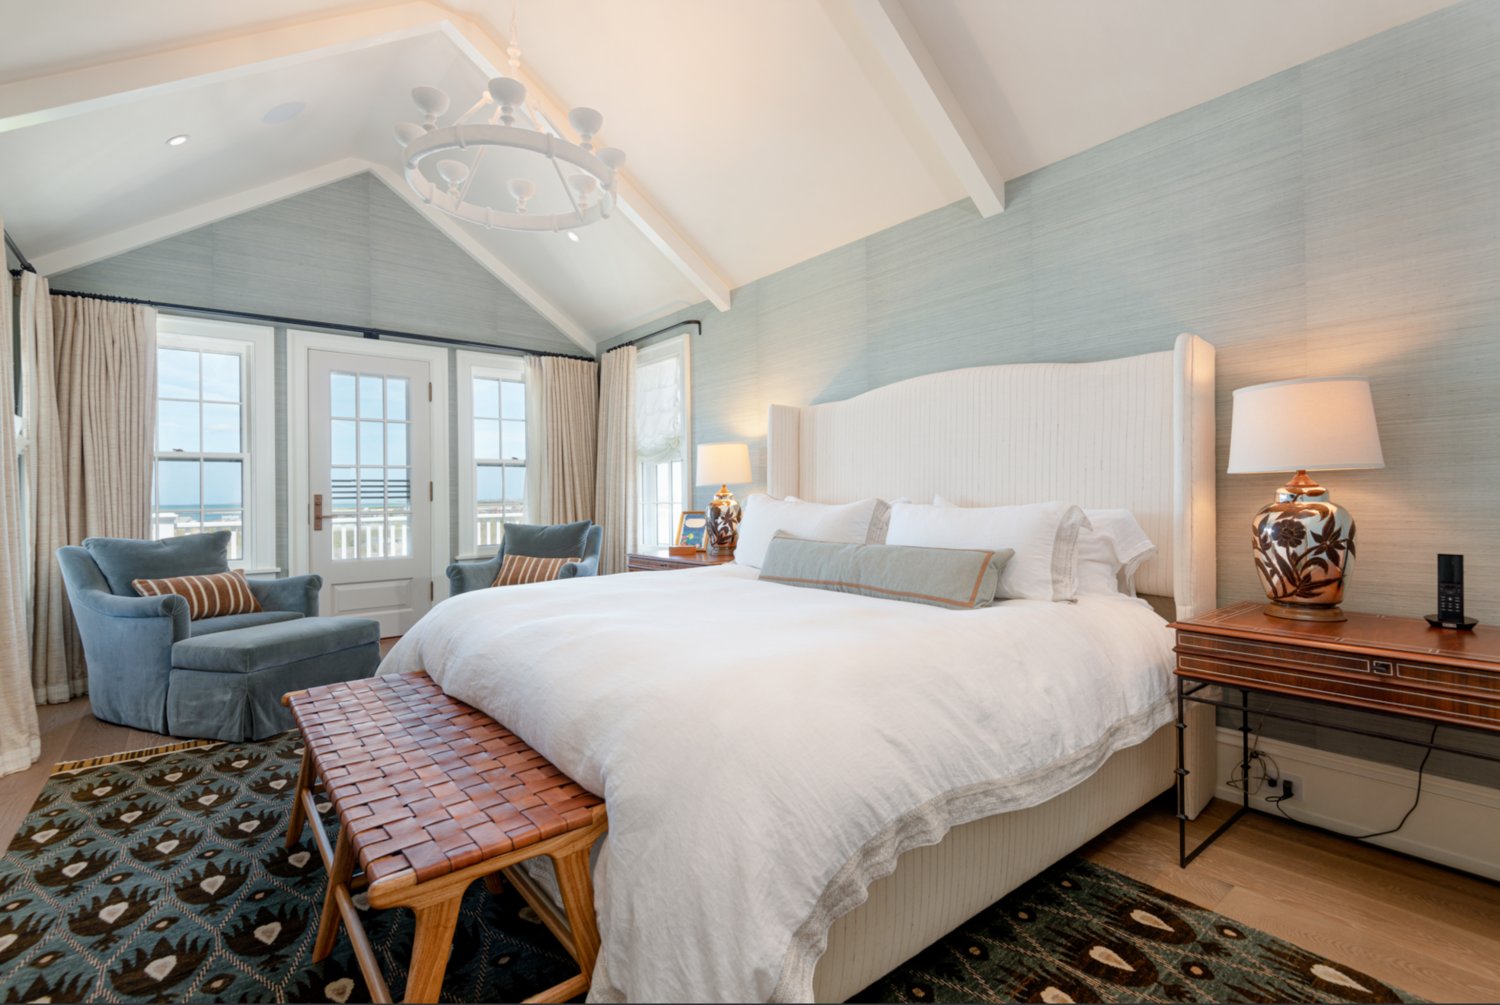 The master bedroom suite occupies an entire wing of the home’s second floor.